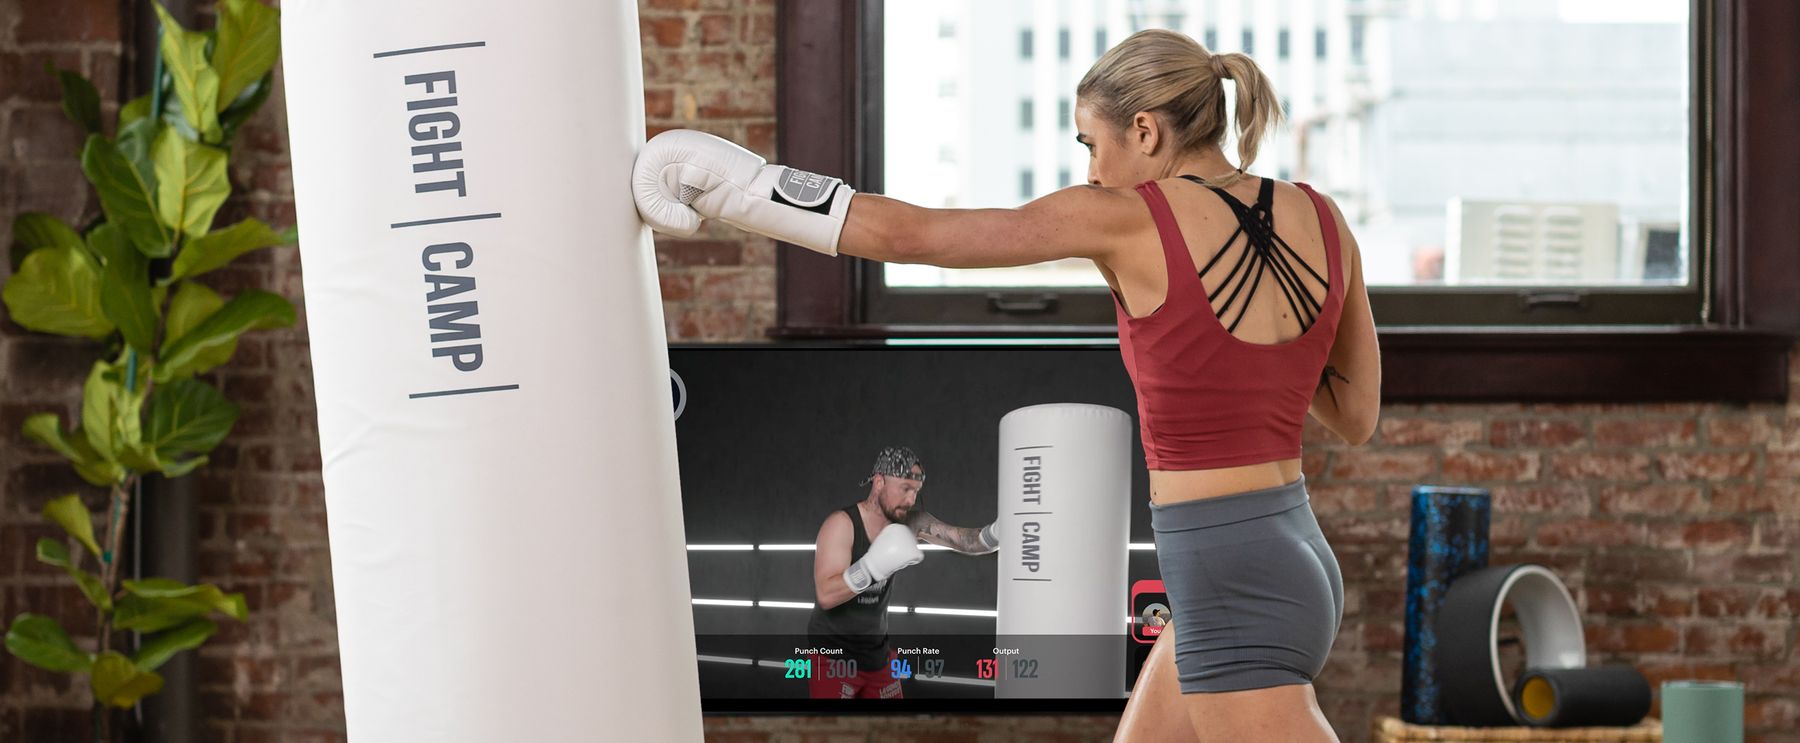 FightCamp - At Home Boxing Workout for Beginners